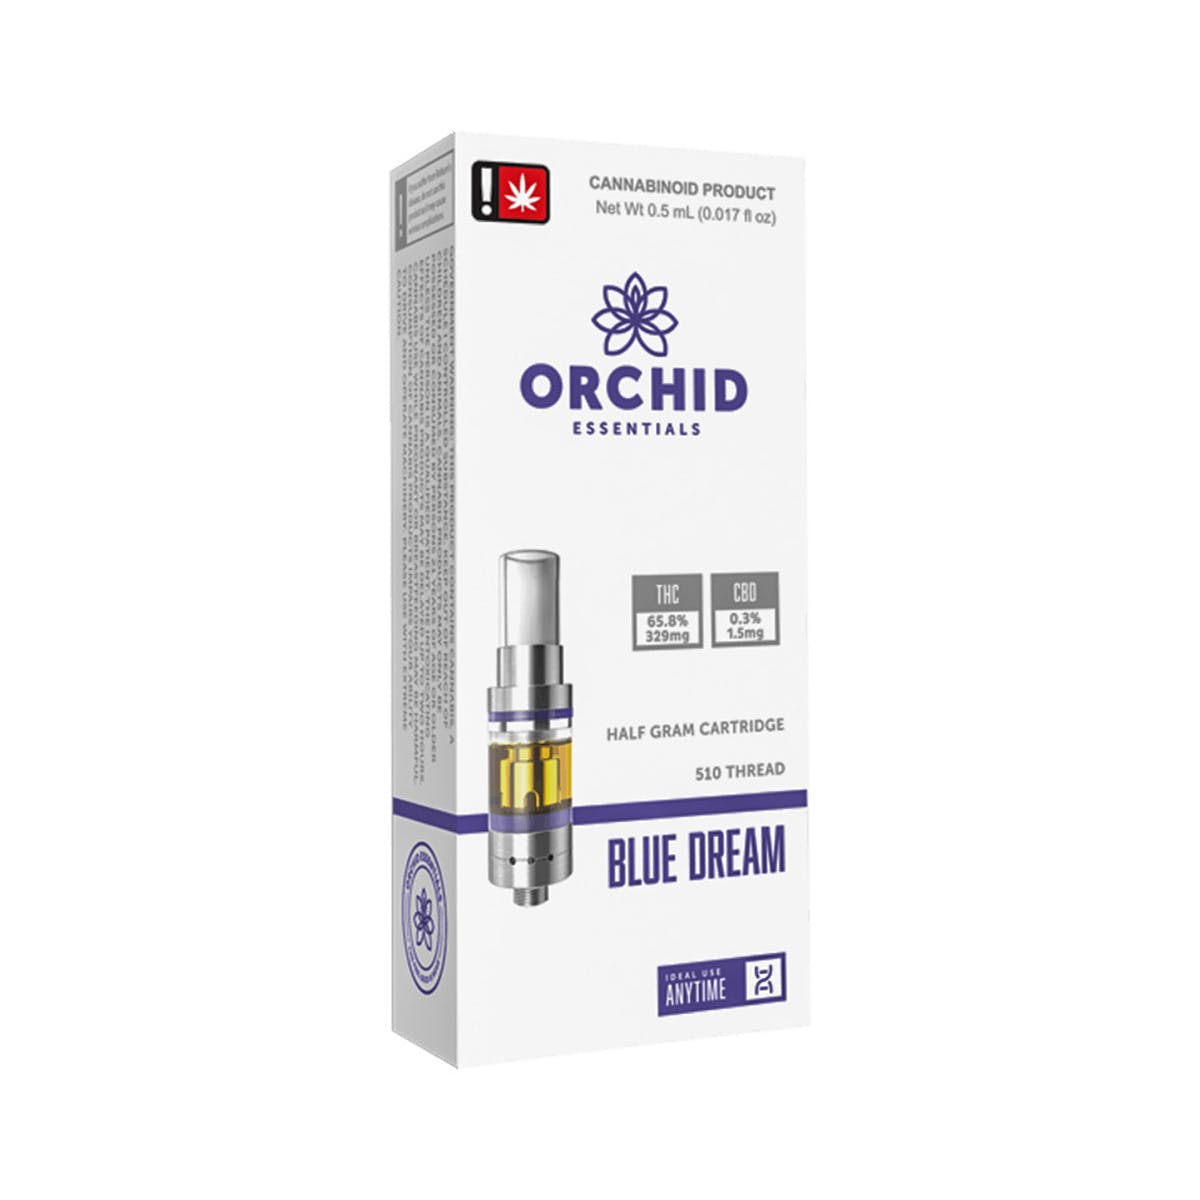 concentrate-orchid-essentials-blue-dream-5g-refill-cartridge